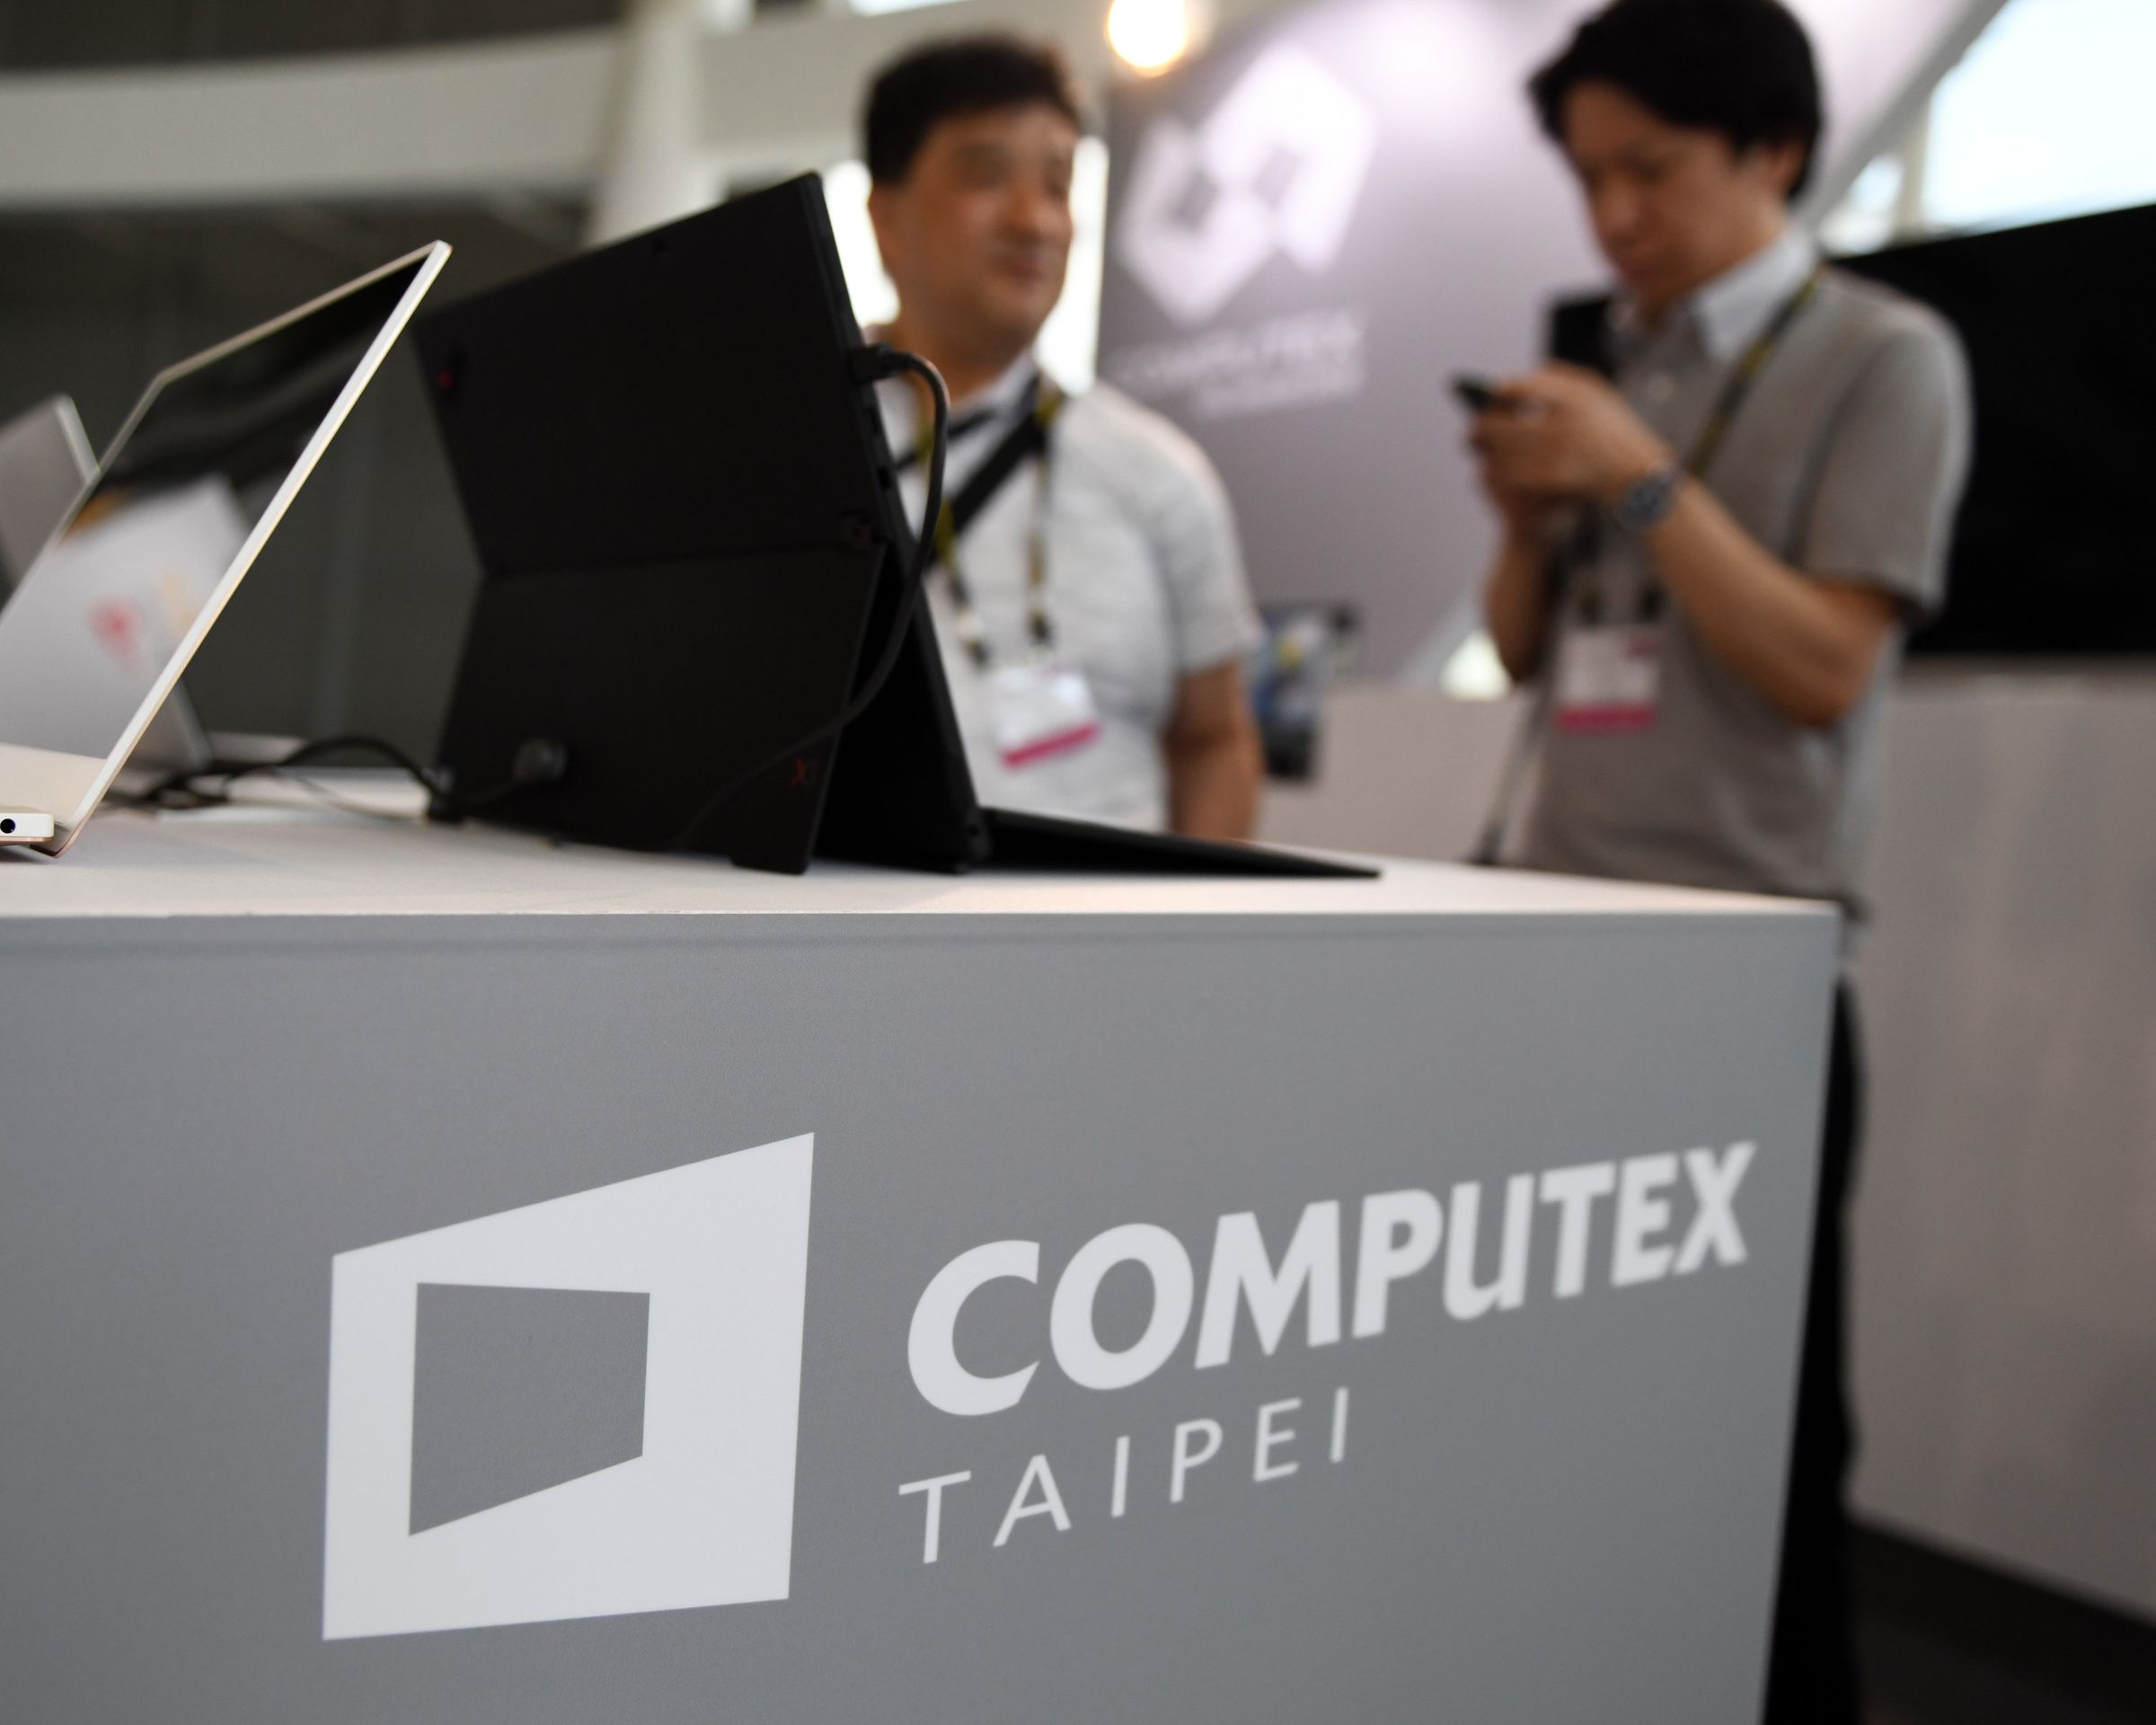 Two visitors stand behind a desk with Computex logo during Computex 2018 at the Nangang Exhibition Center in Taipei.